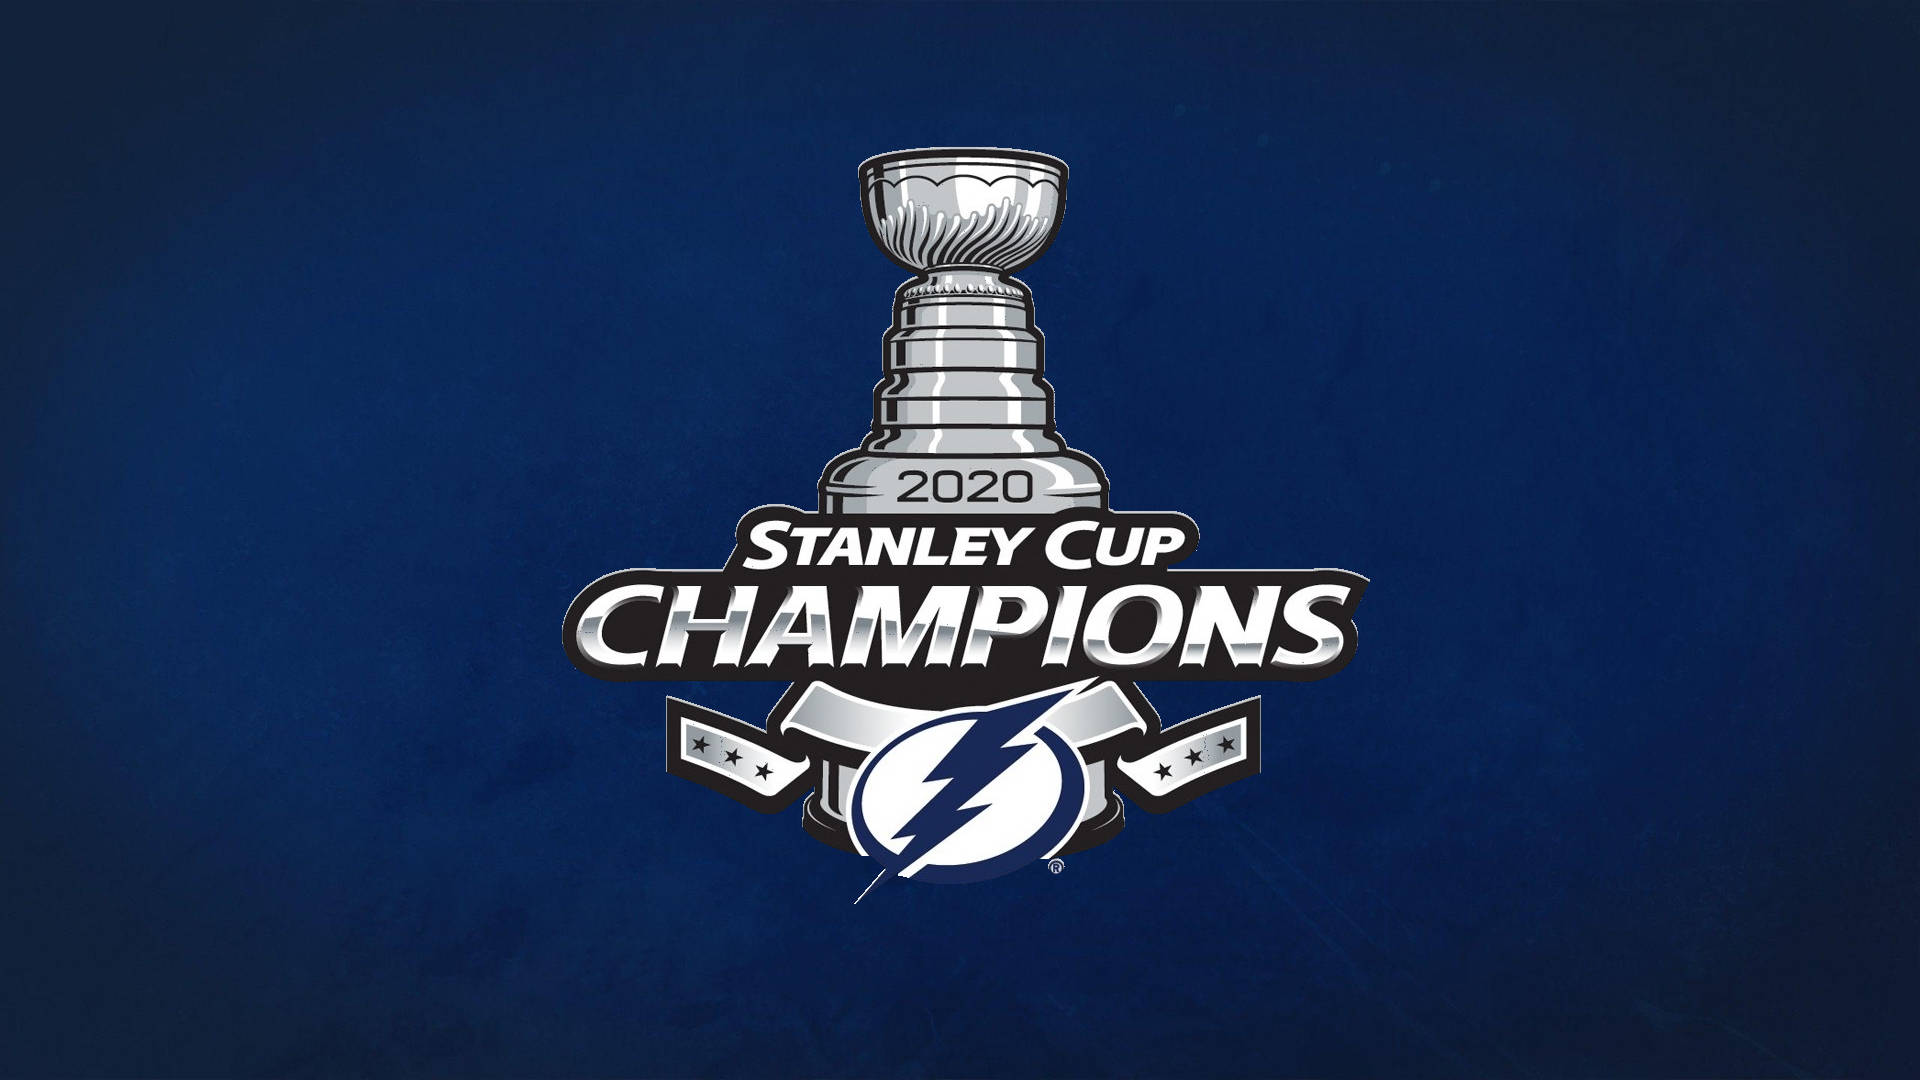 Tampa Bay Lightning - 2020 Stanley Cup Champions Wallpaper